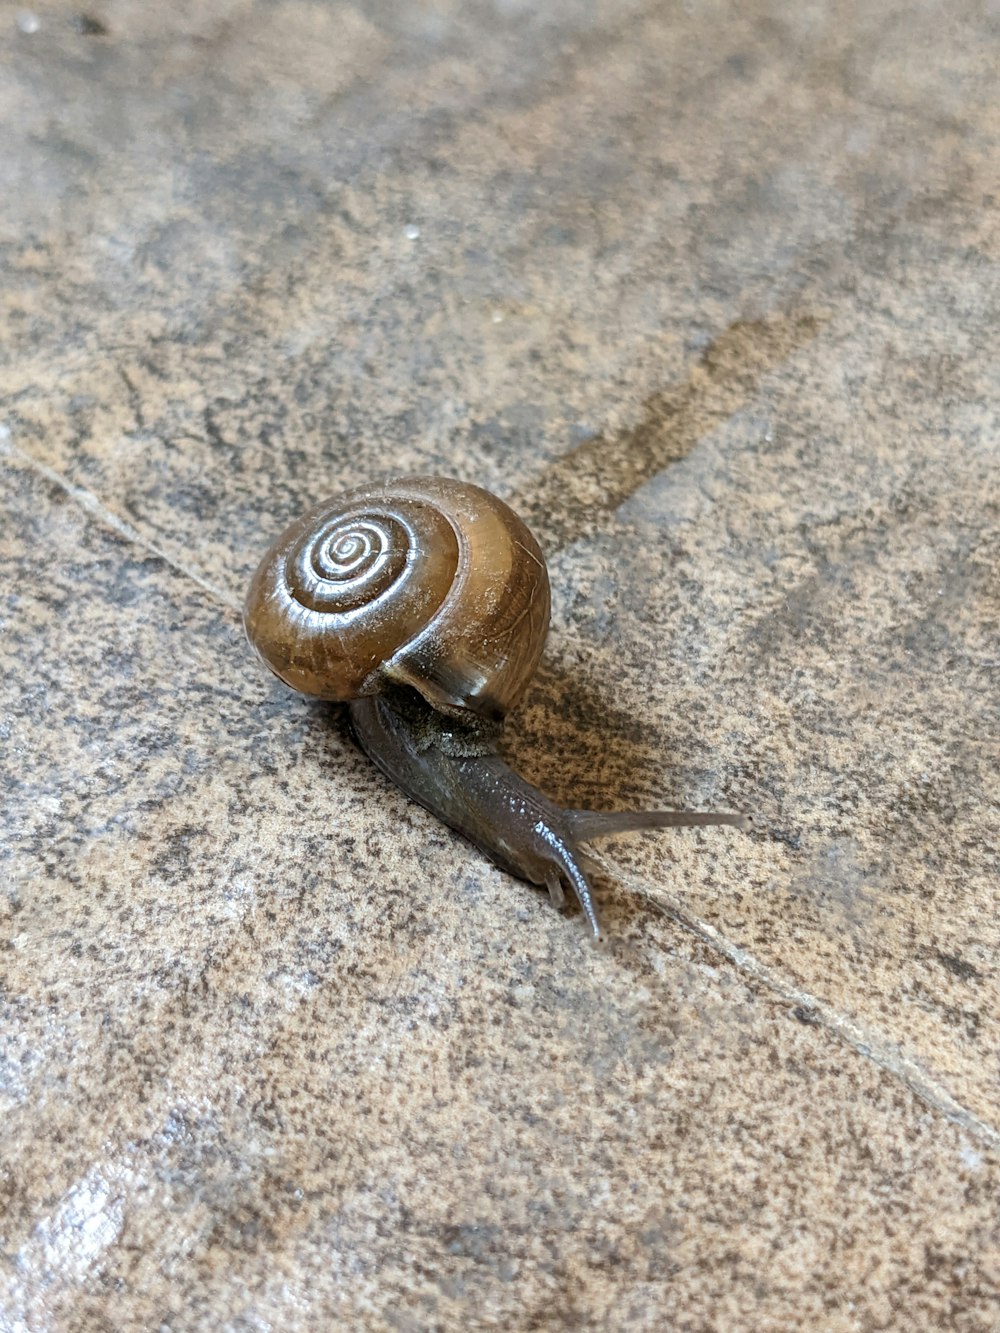 a snail crawling on the ground next to a feather